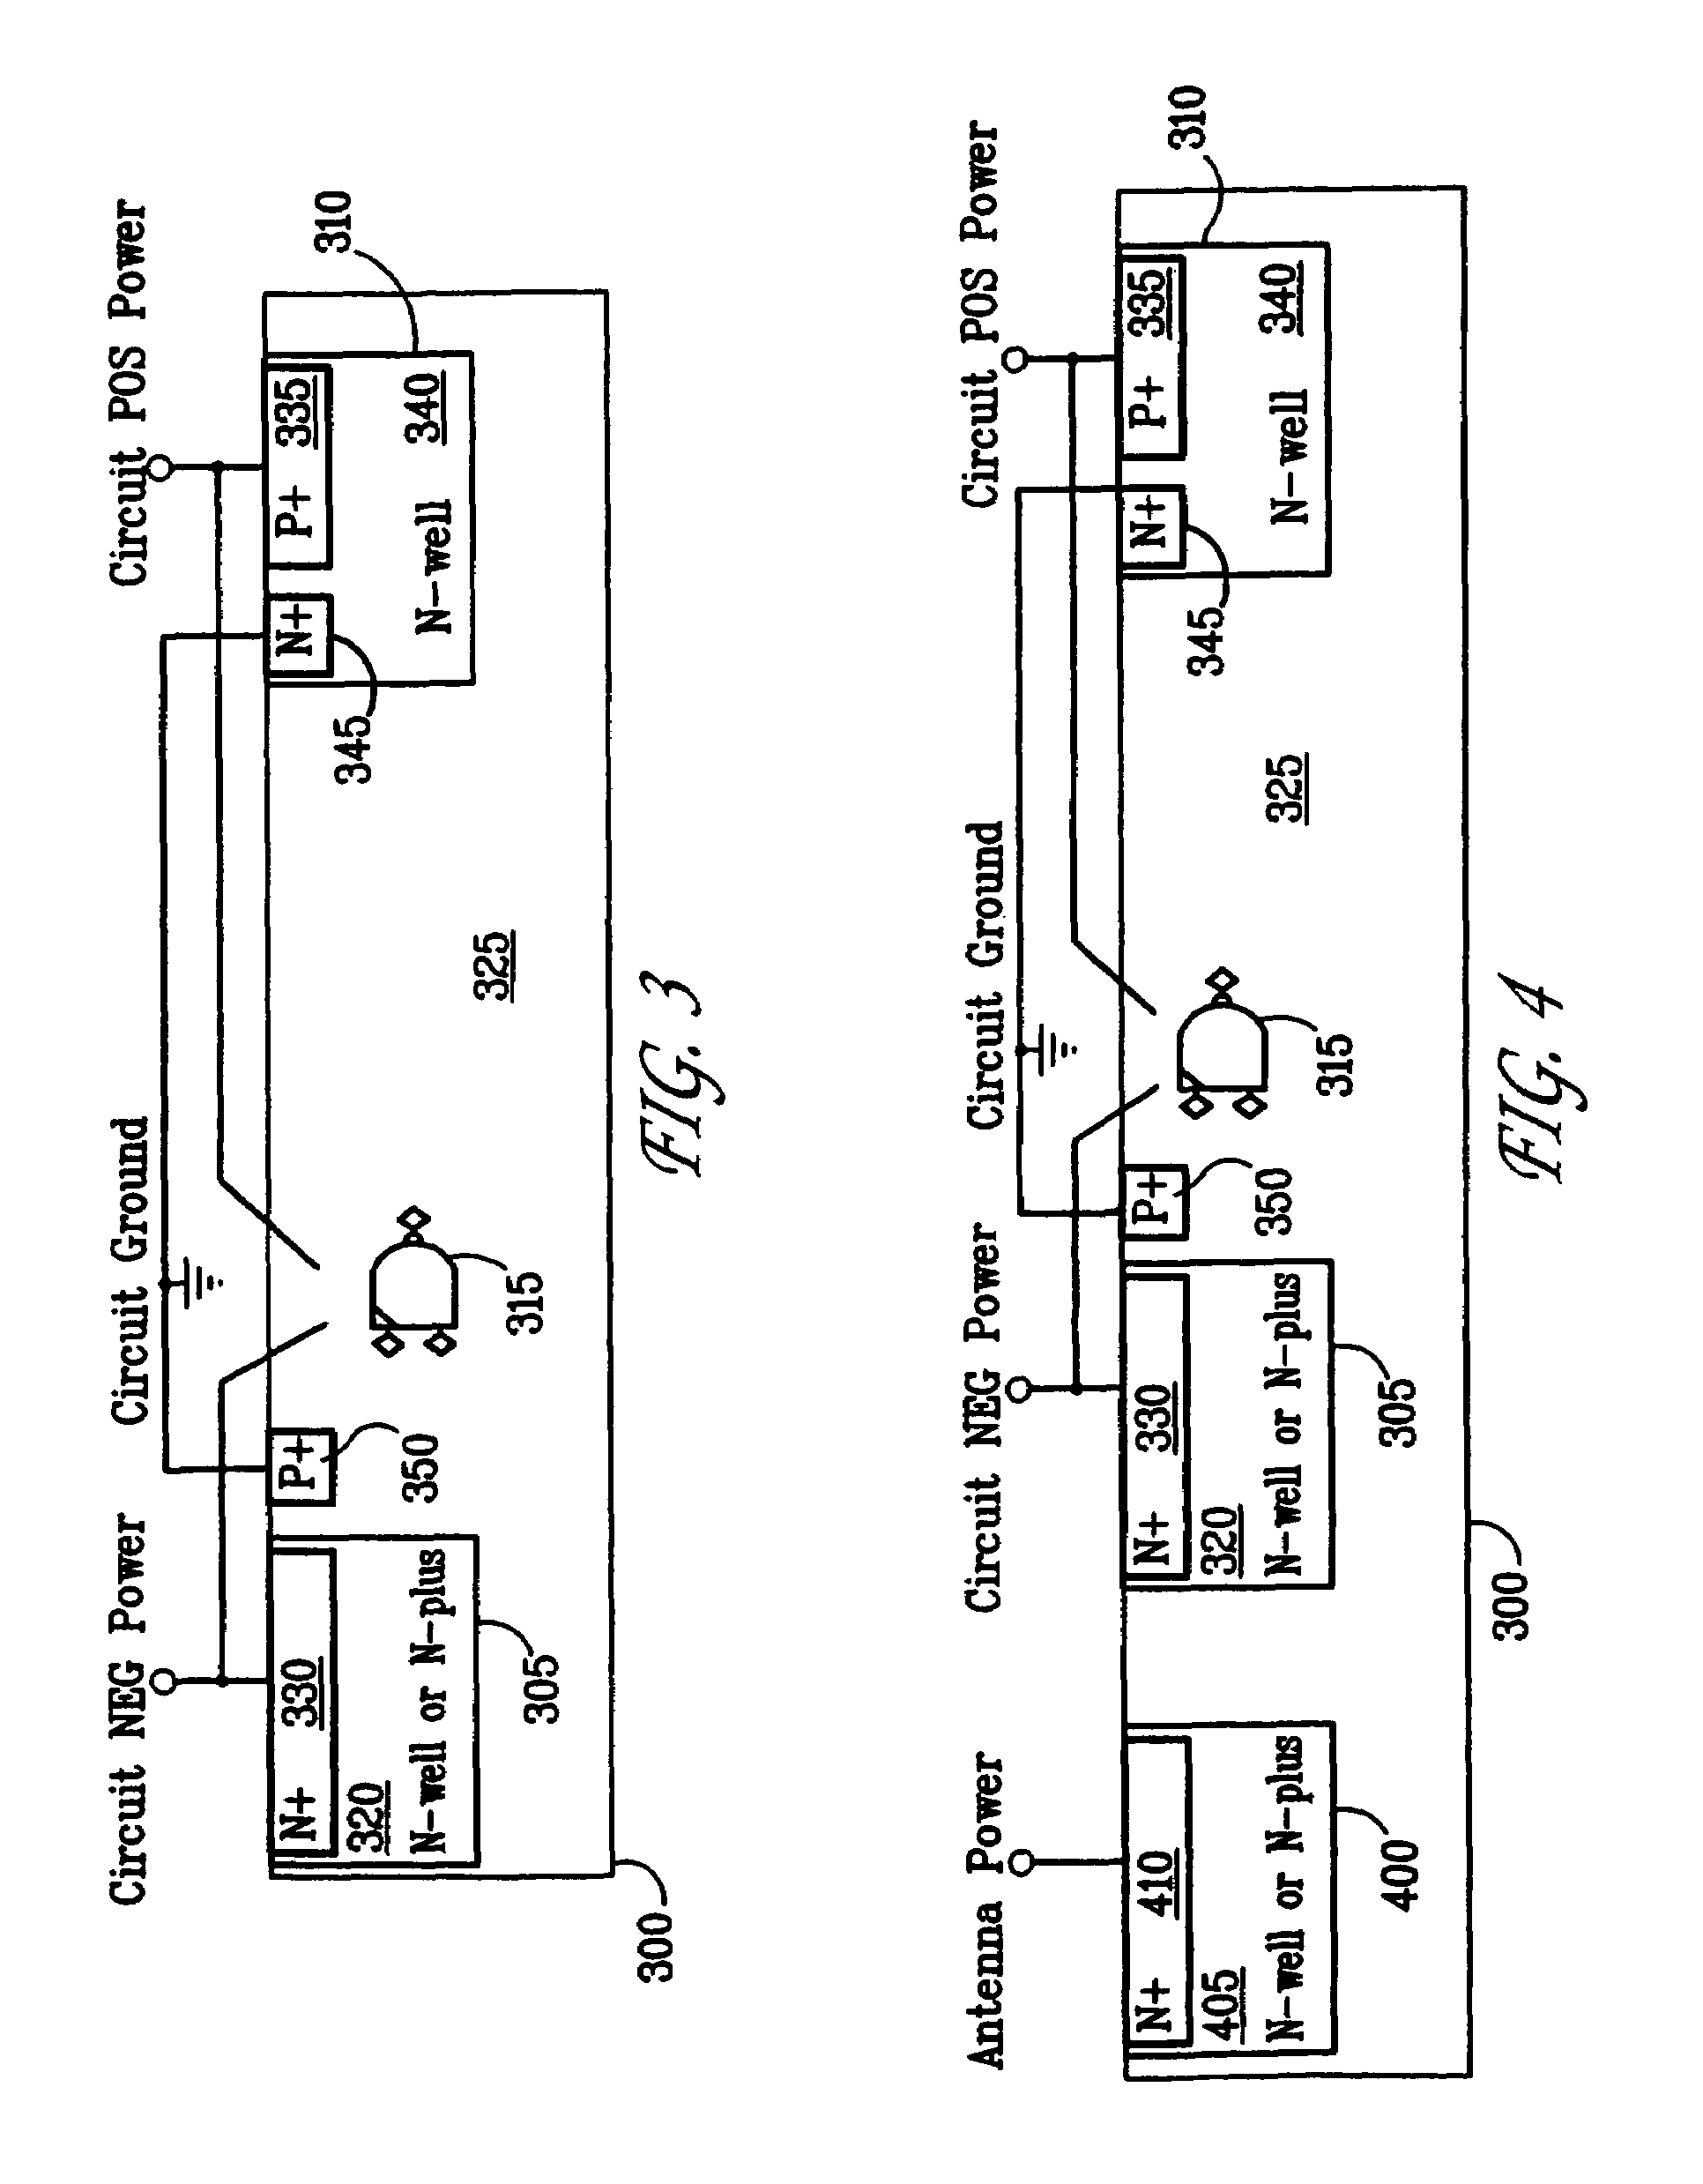 Method and apparatus for powering circuitry with on-chip solar cells within a common substrate